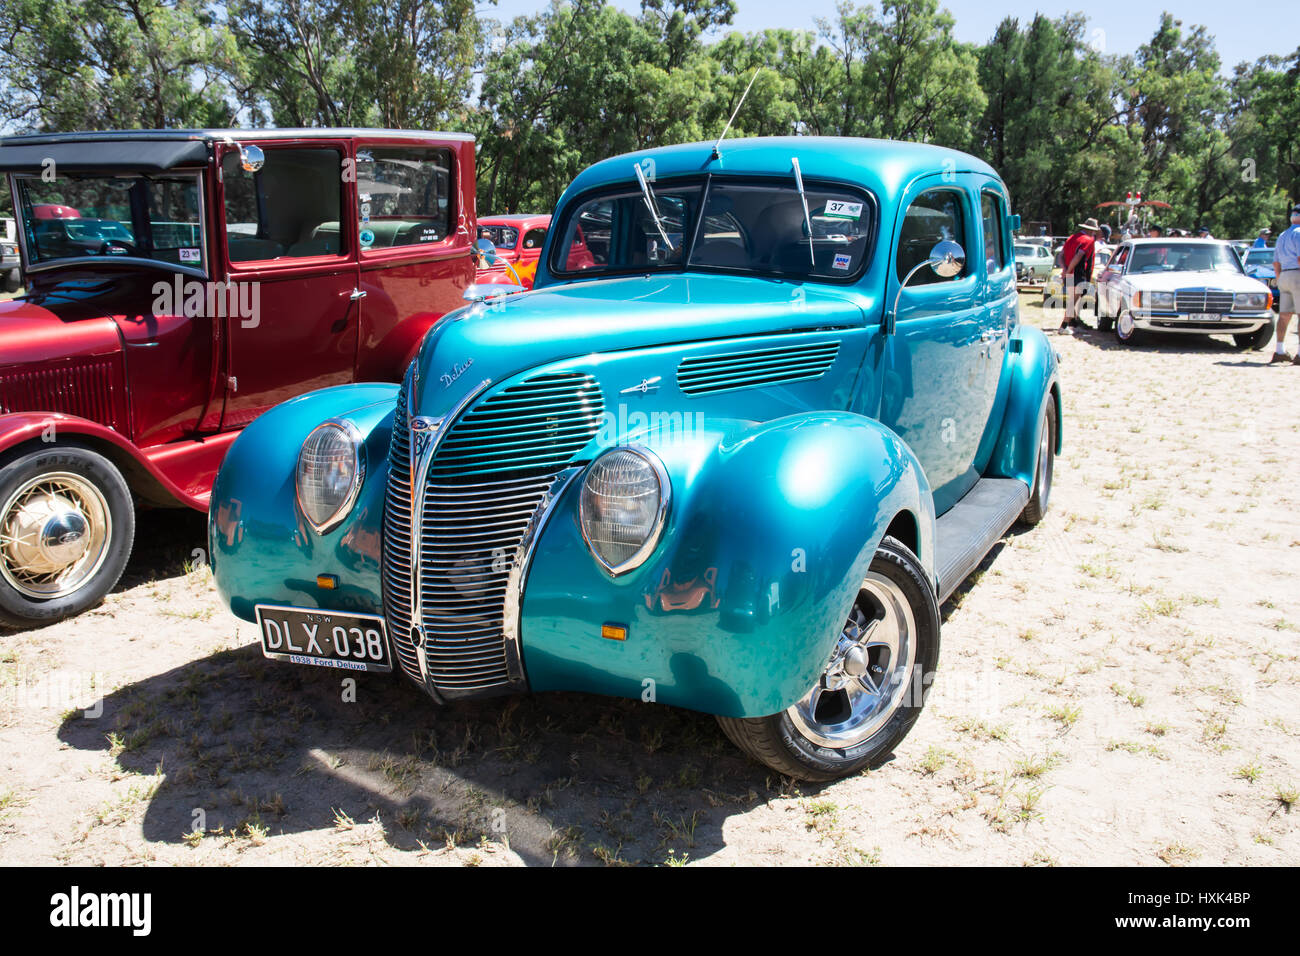 A Turquoise colored 1938 Ford Deluxe V8 car. Stock Photo